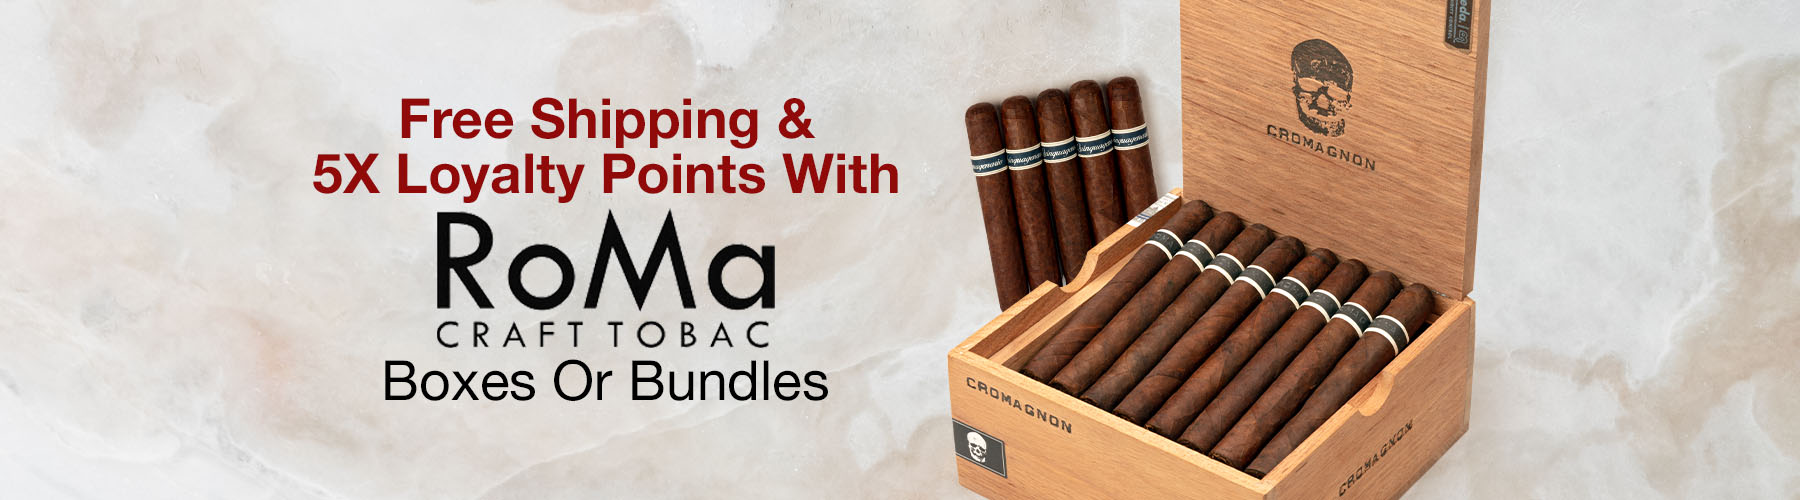 Free Shipping & 5X Loyalty Points with Roma Craft boxes or bundles!